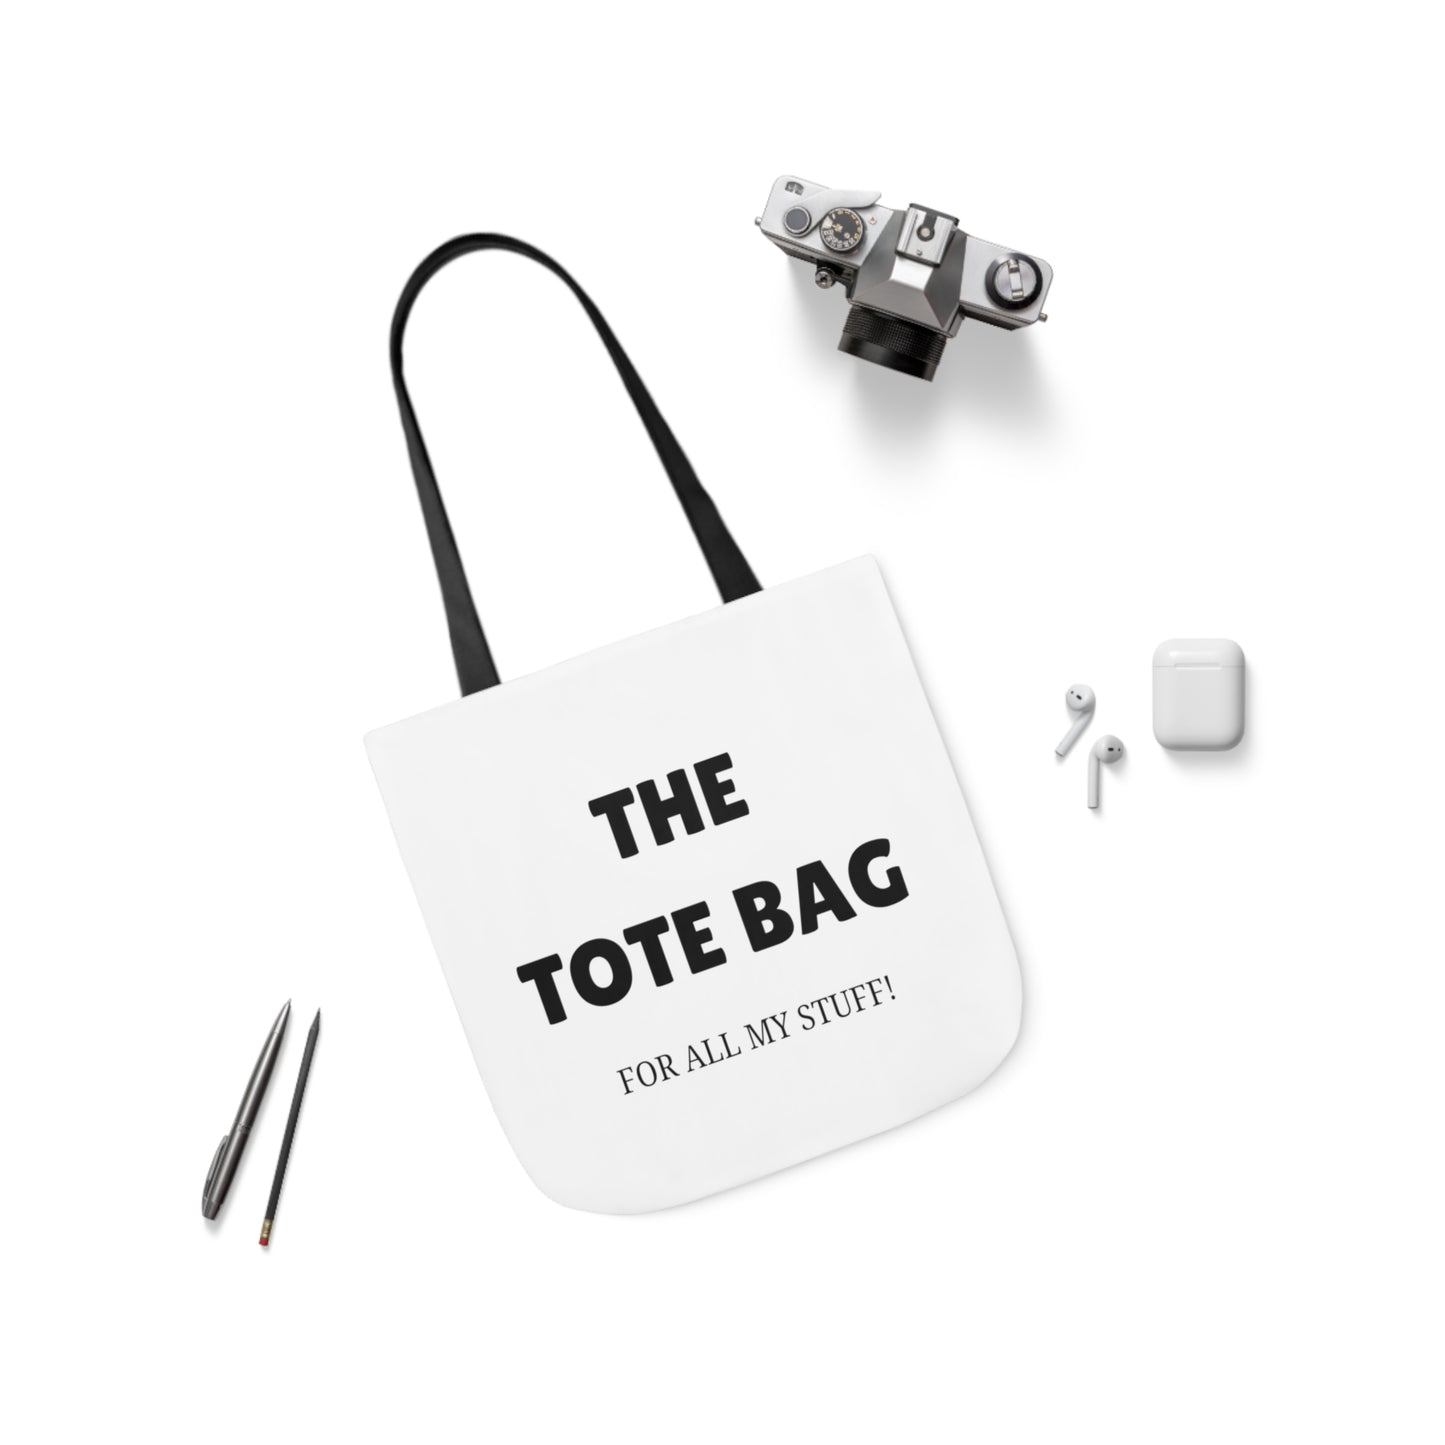 Thee Tote Bag